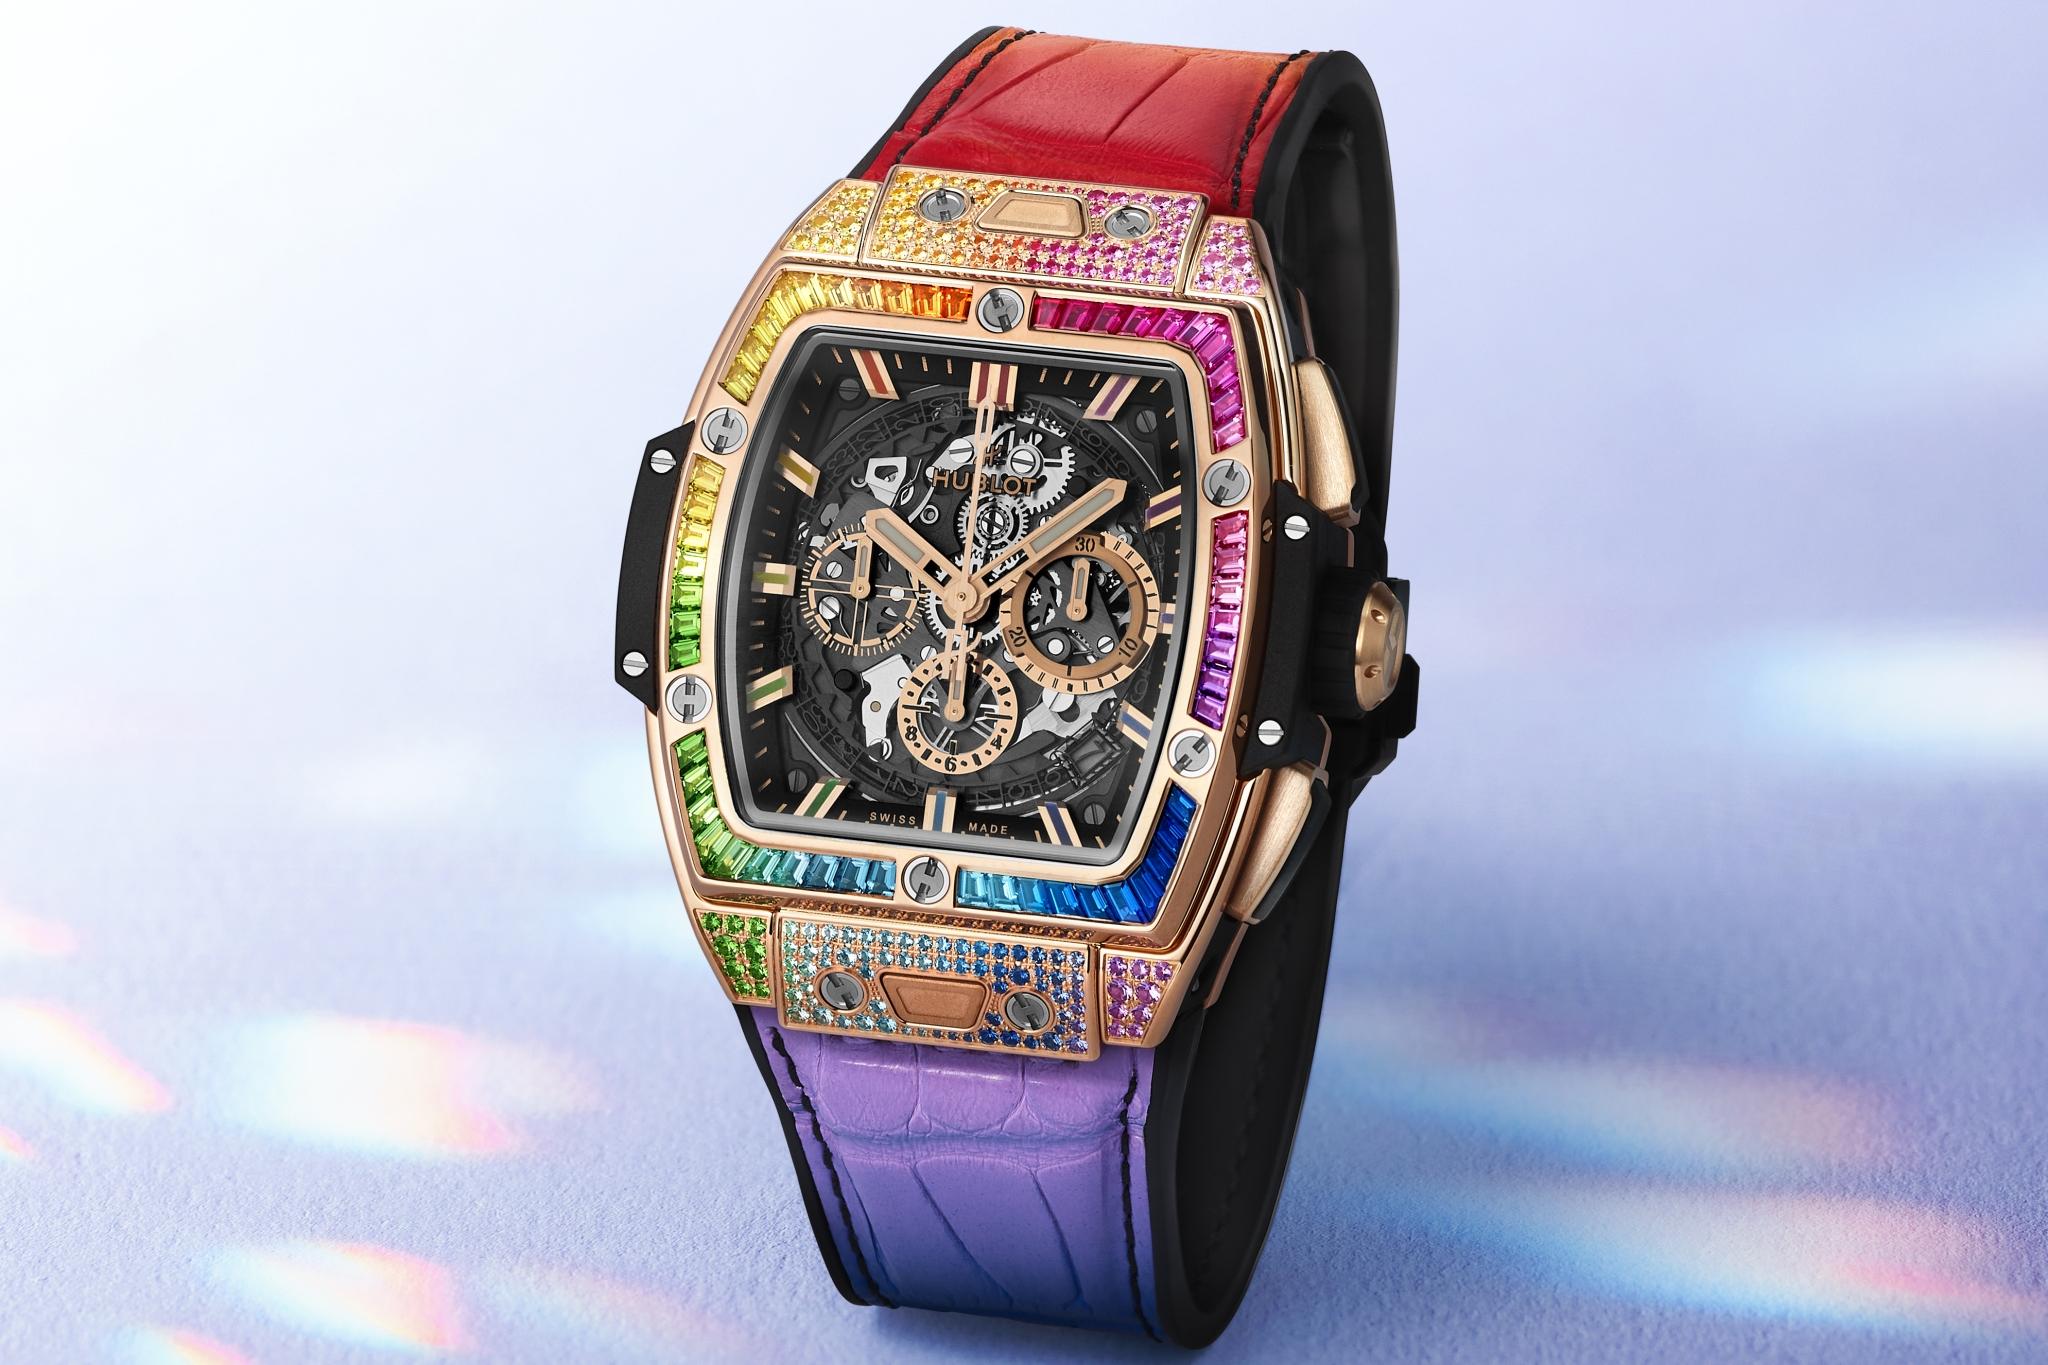 The Hublot Spirit of Big Bang King Gold Rainbow 42mm. Click here to book a consultation.